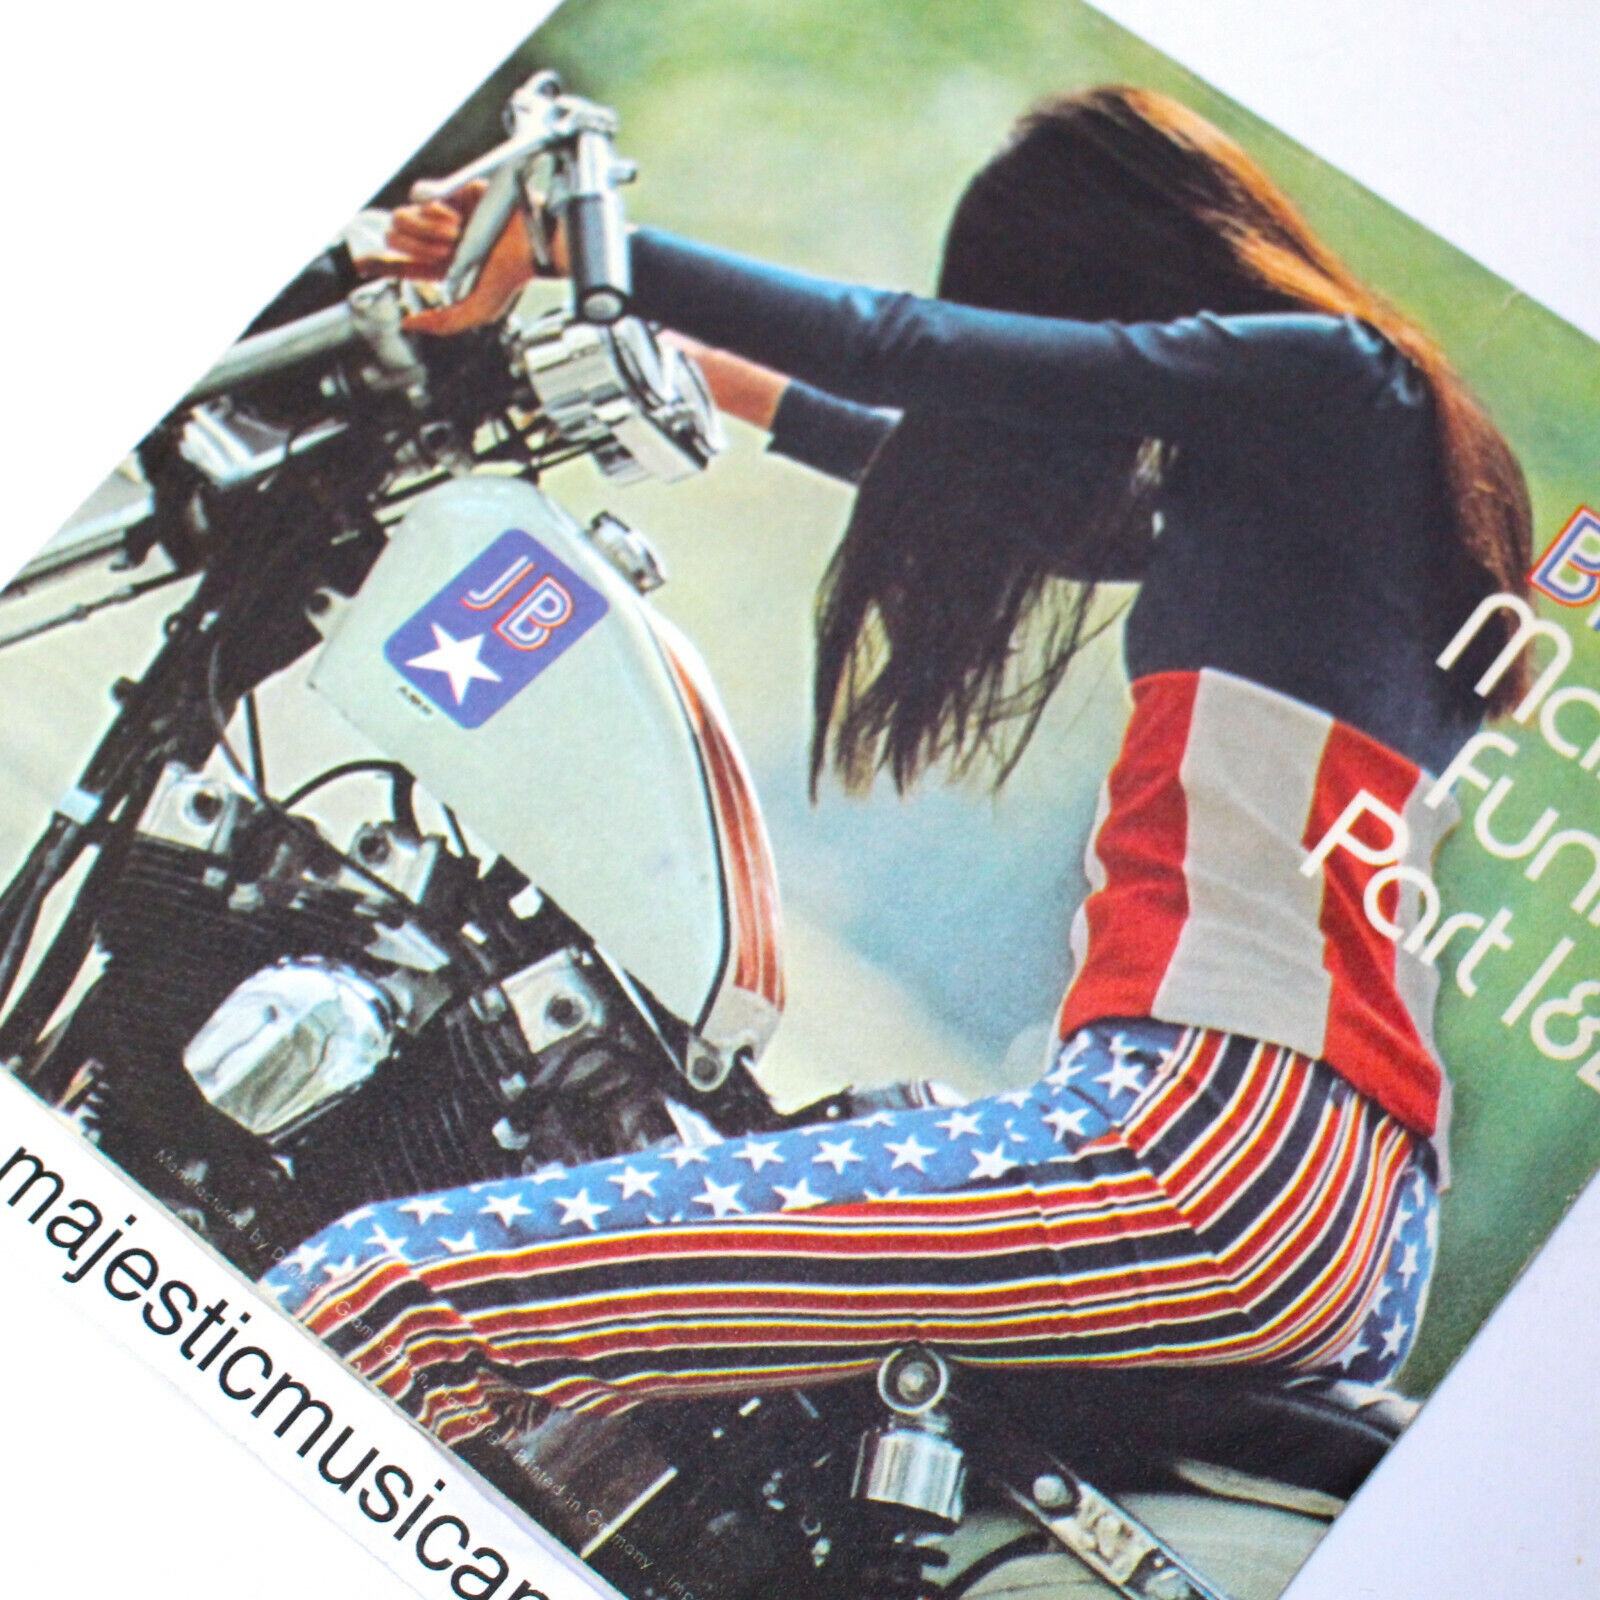 RARE CHOPPER HARLEY MOTORCYCLE COVER JAMES BROWN MAKE IT FUNKY 7